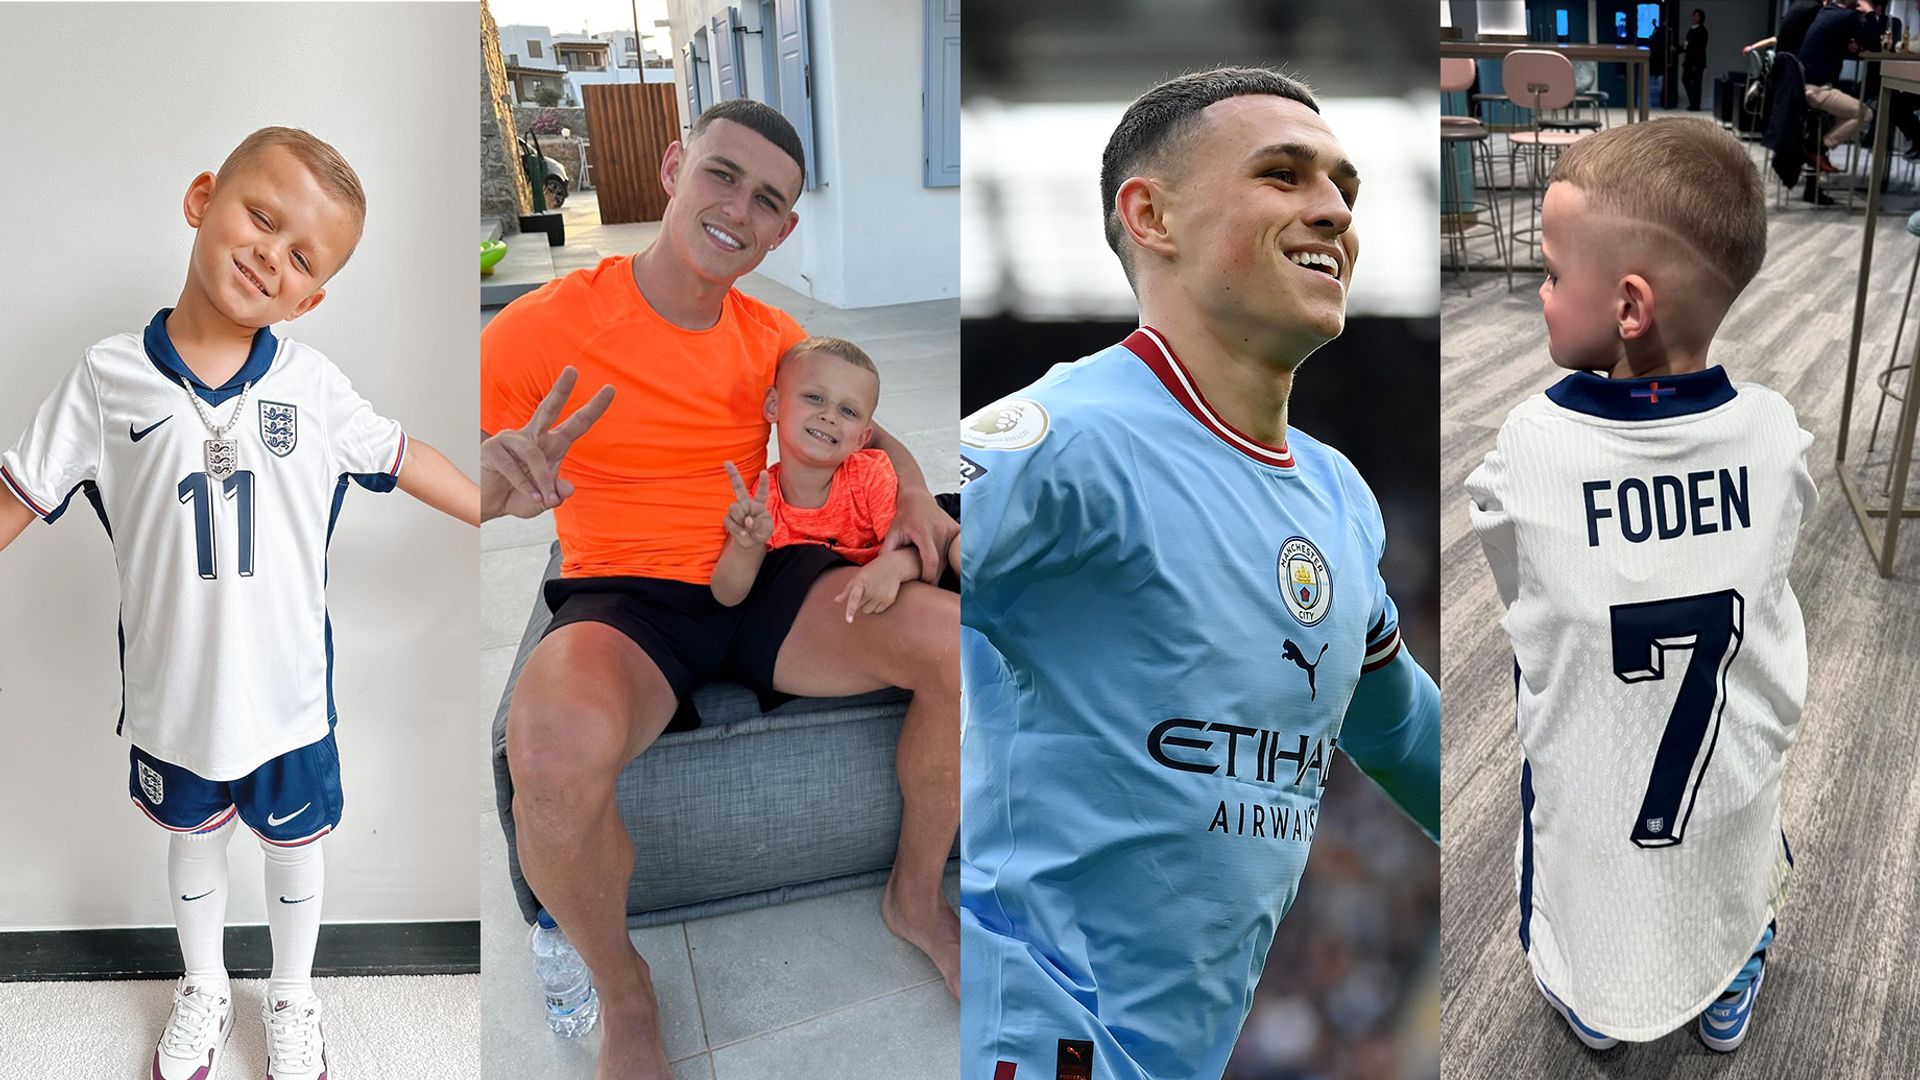 Phil Foden's mini-me famous son Ronnie, 5, has more Instagram followers than the England team